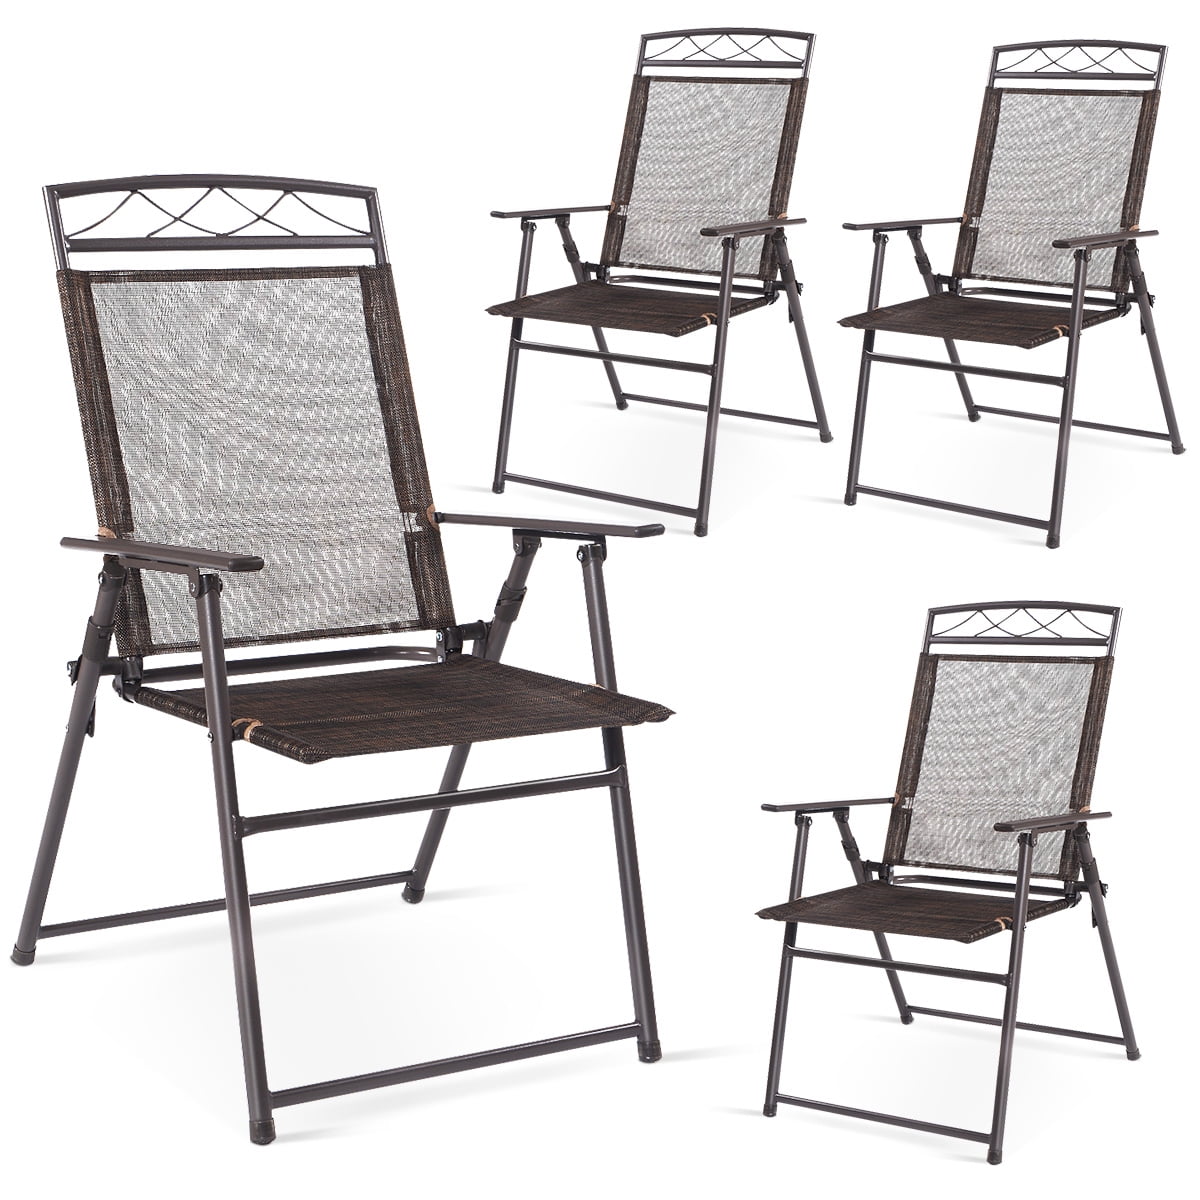 Giantex Set of 4 Patio Dining Chairs 4, Gray Headrest Outdoor Portable Chairs with Metal Frame Folding Lounge Chairs with 7 Level Adjustable Backrest 300 Lbs Capacity 